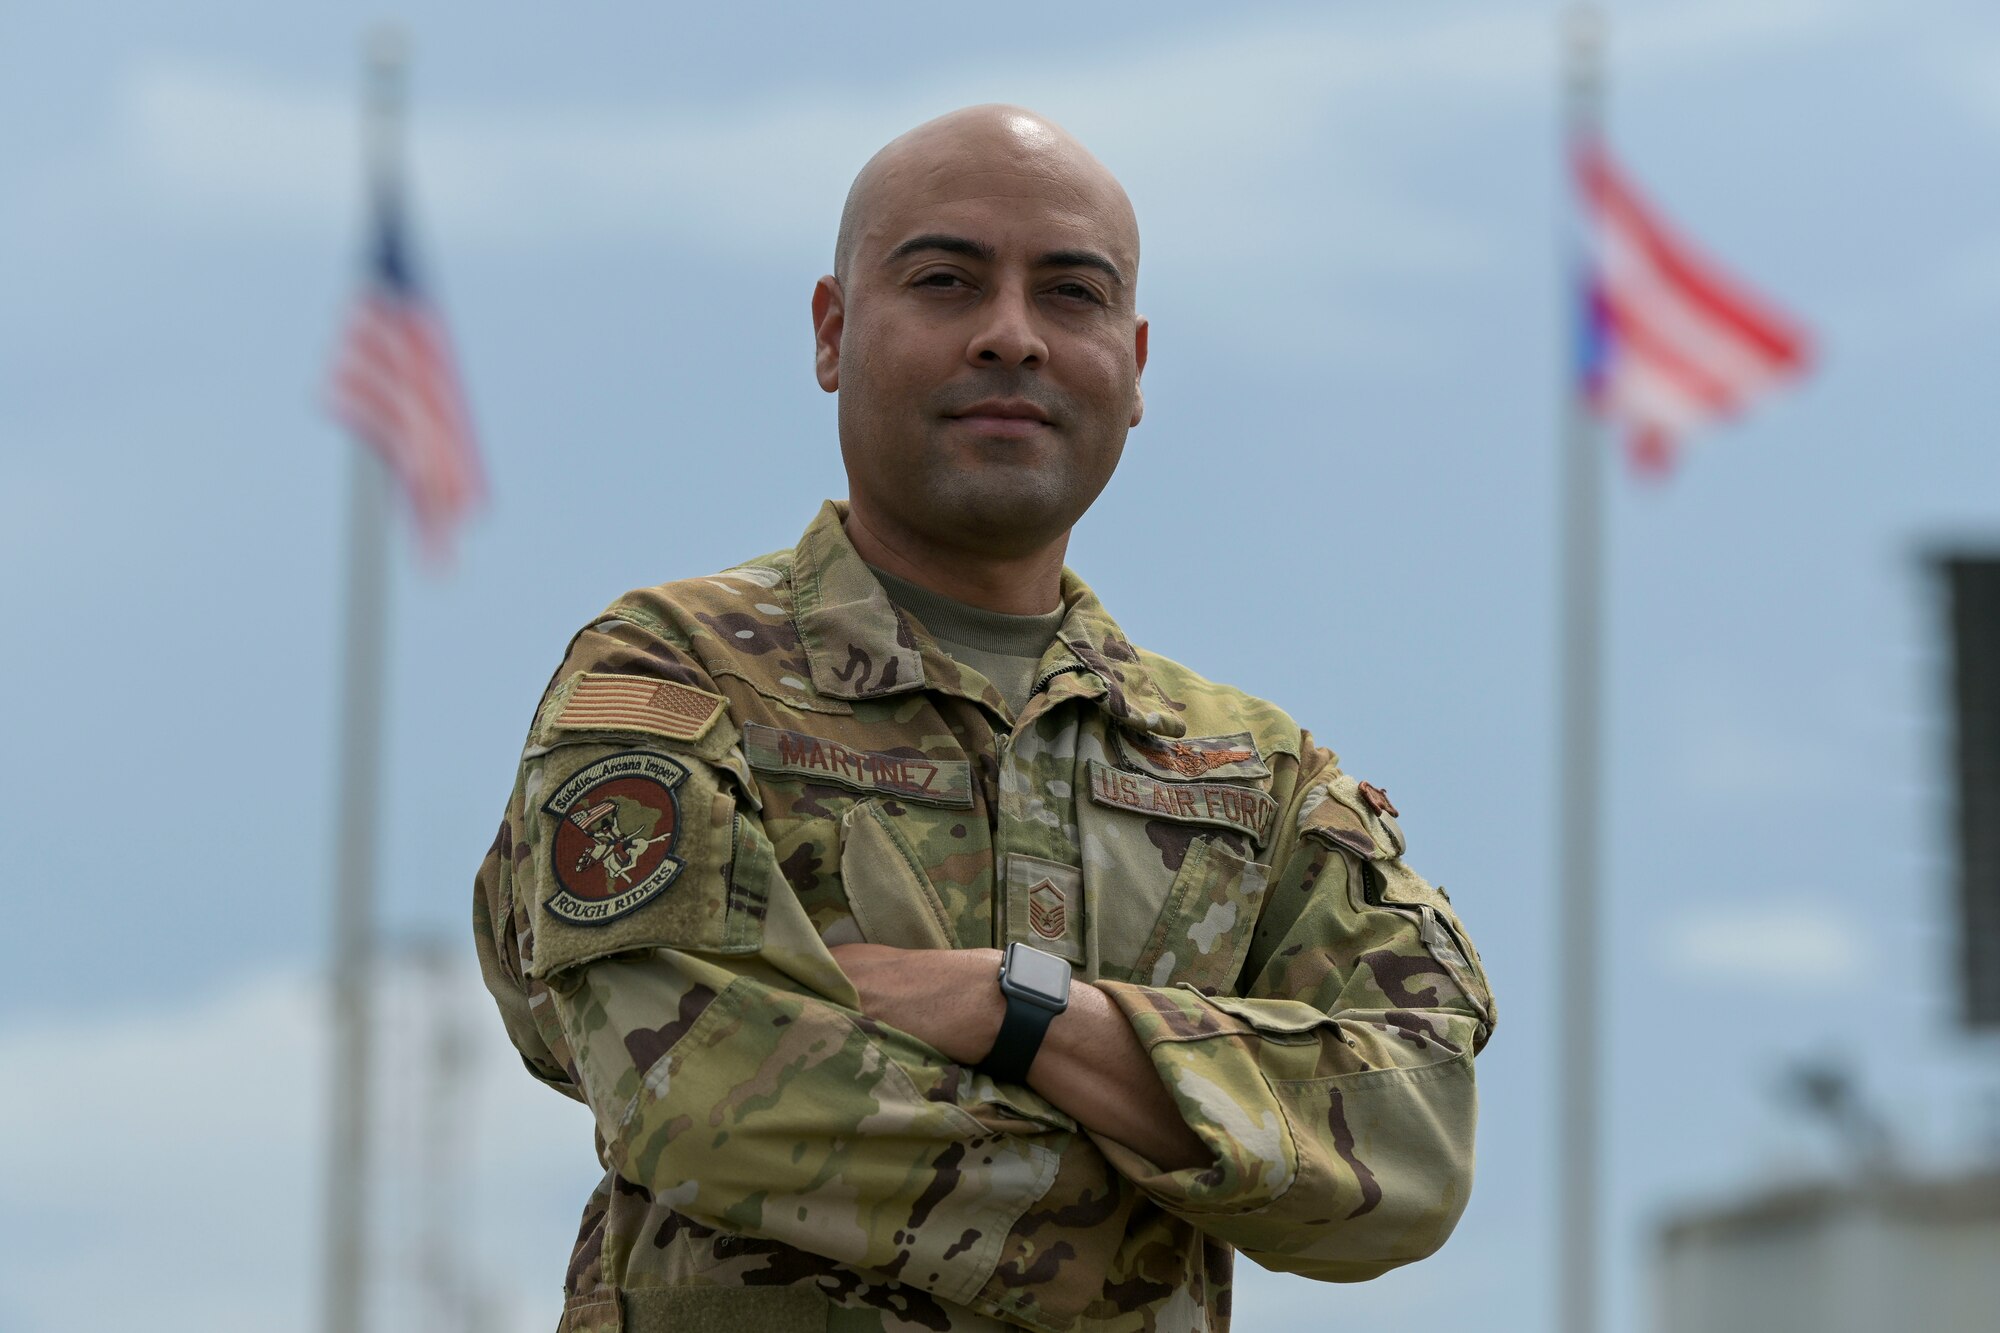 U.S. Air Force Master Sgt. Dennis Martinez, an airborne systems operator with the 156th Operations Group, Host Nation Rider program, poses for a portrait, Sept. 15, 2021 at Punta Salinas Air Guard Station, Toa Baja, Puerto Rico Air National Guard. Martinez was selected as the September spotlight for his merits and performance as an airborne systems operator. (U.S. Air National Guard photo by Tech. Sgt. Rafael D. Rosa)